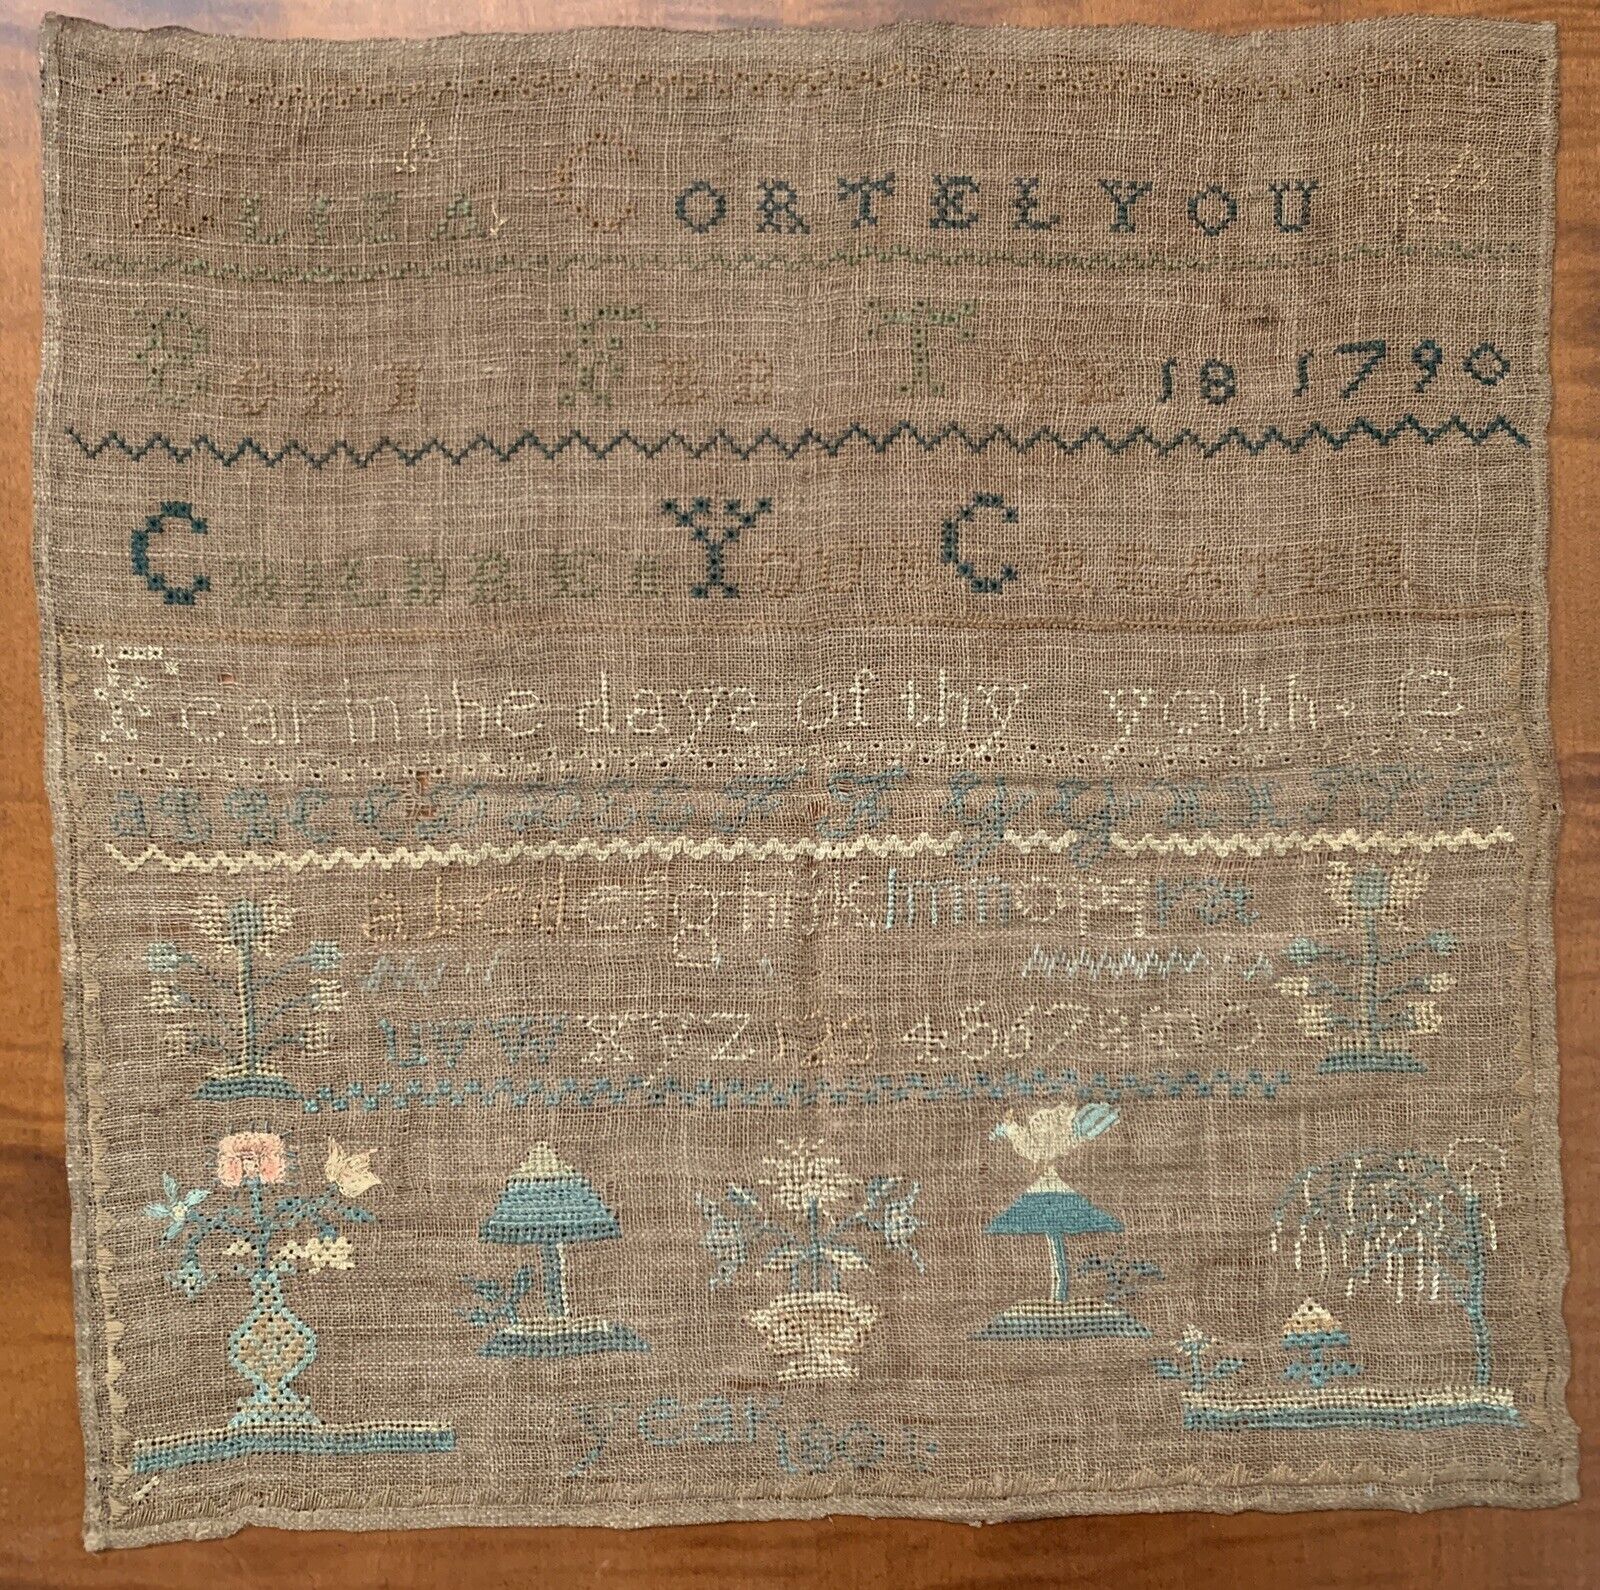 An Antique American Needlework Textile Sampler Dated 1790-1806